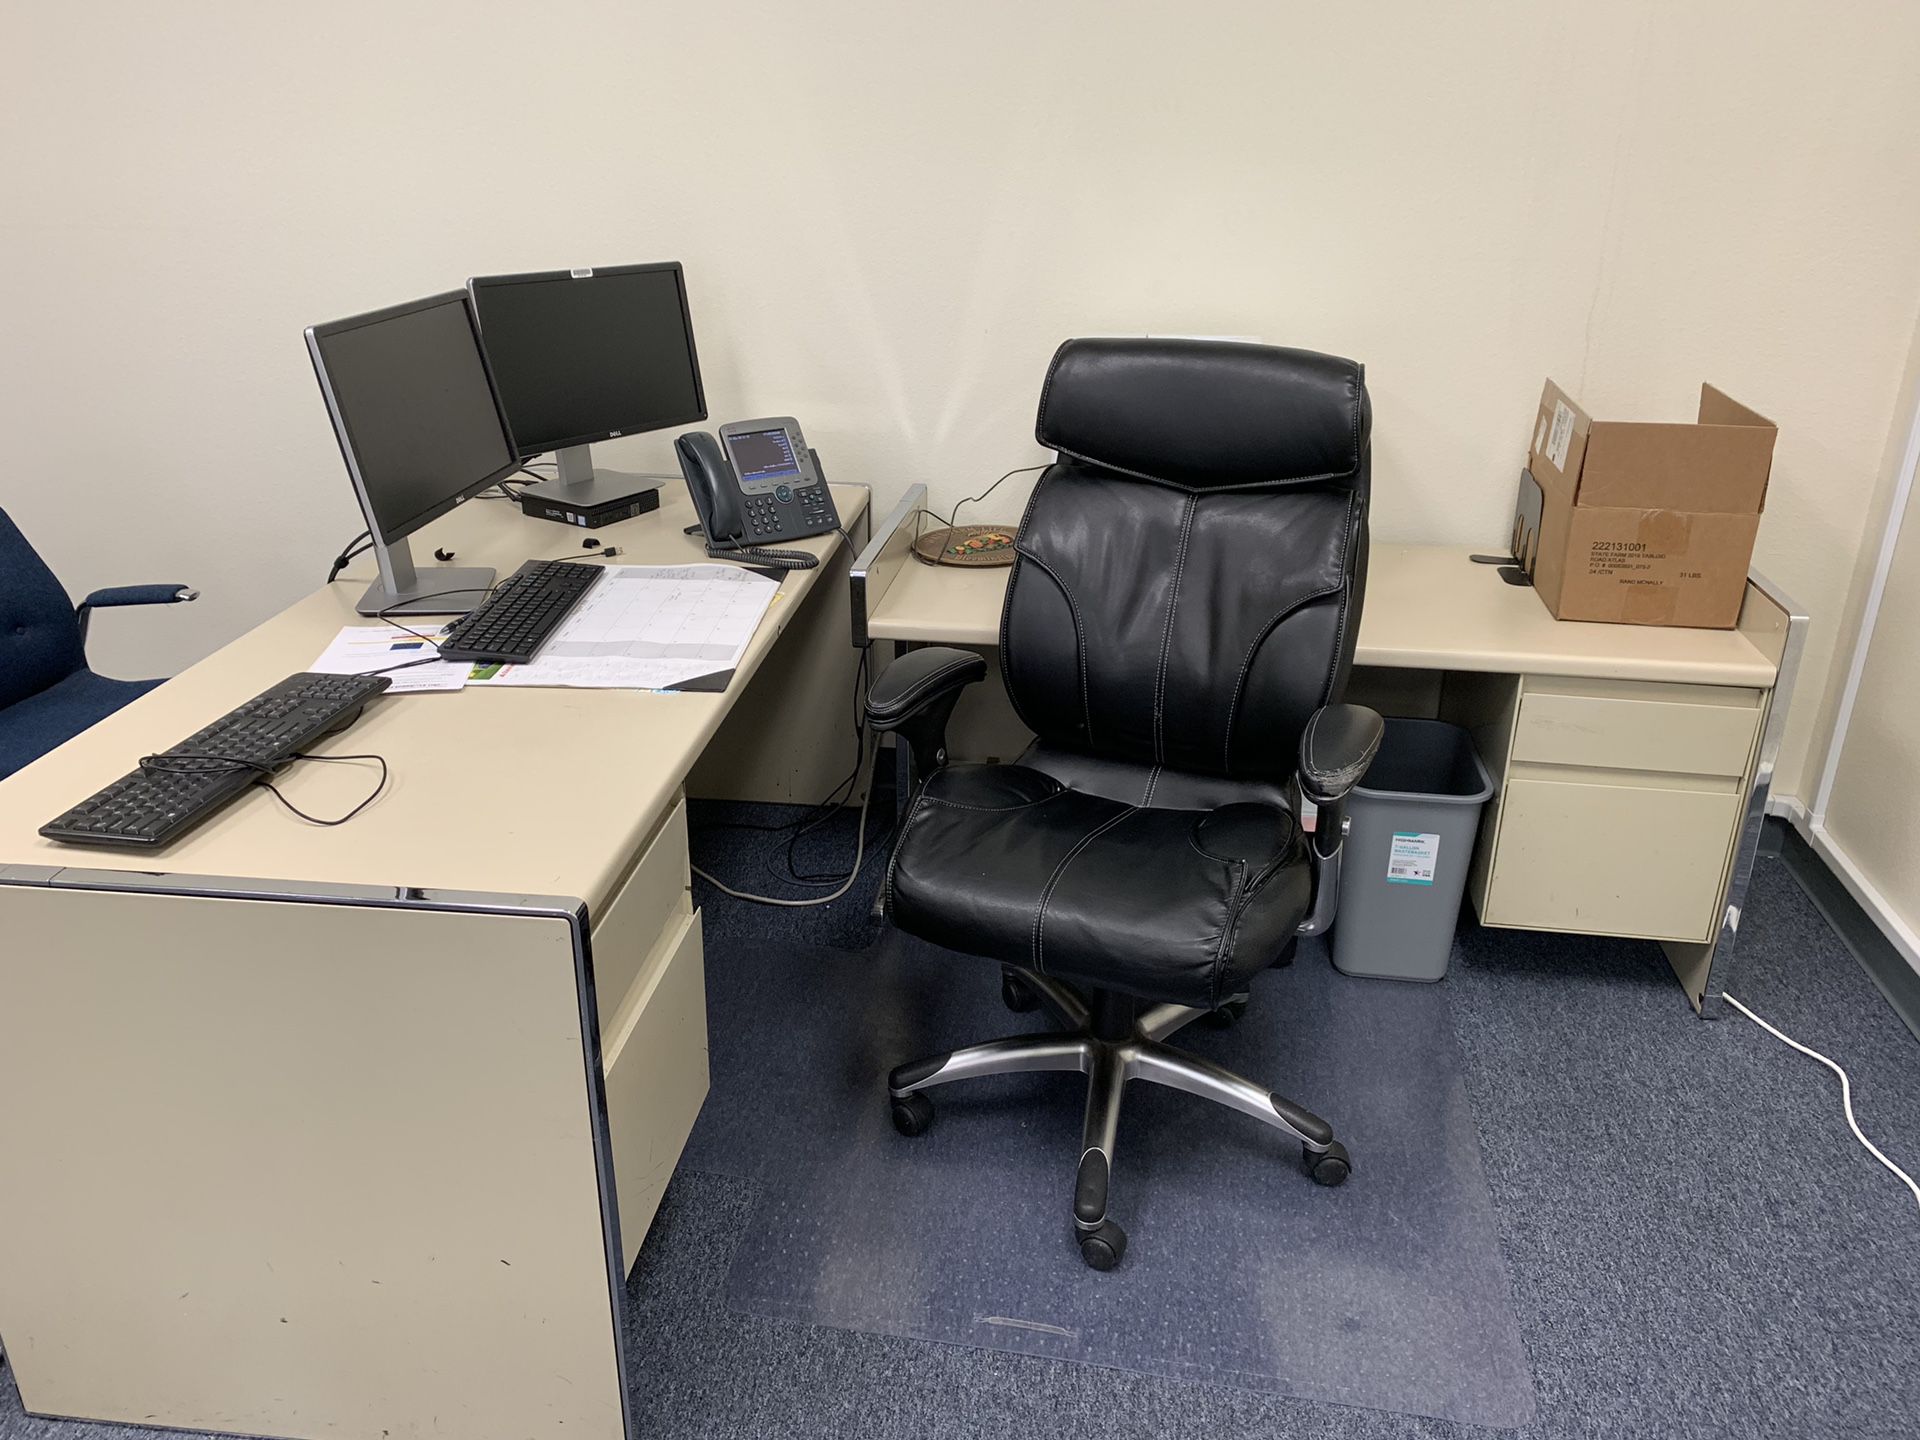 Free office furniture only looking for serious people. PENDING Offer